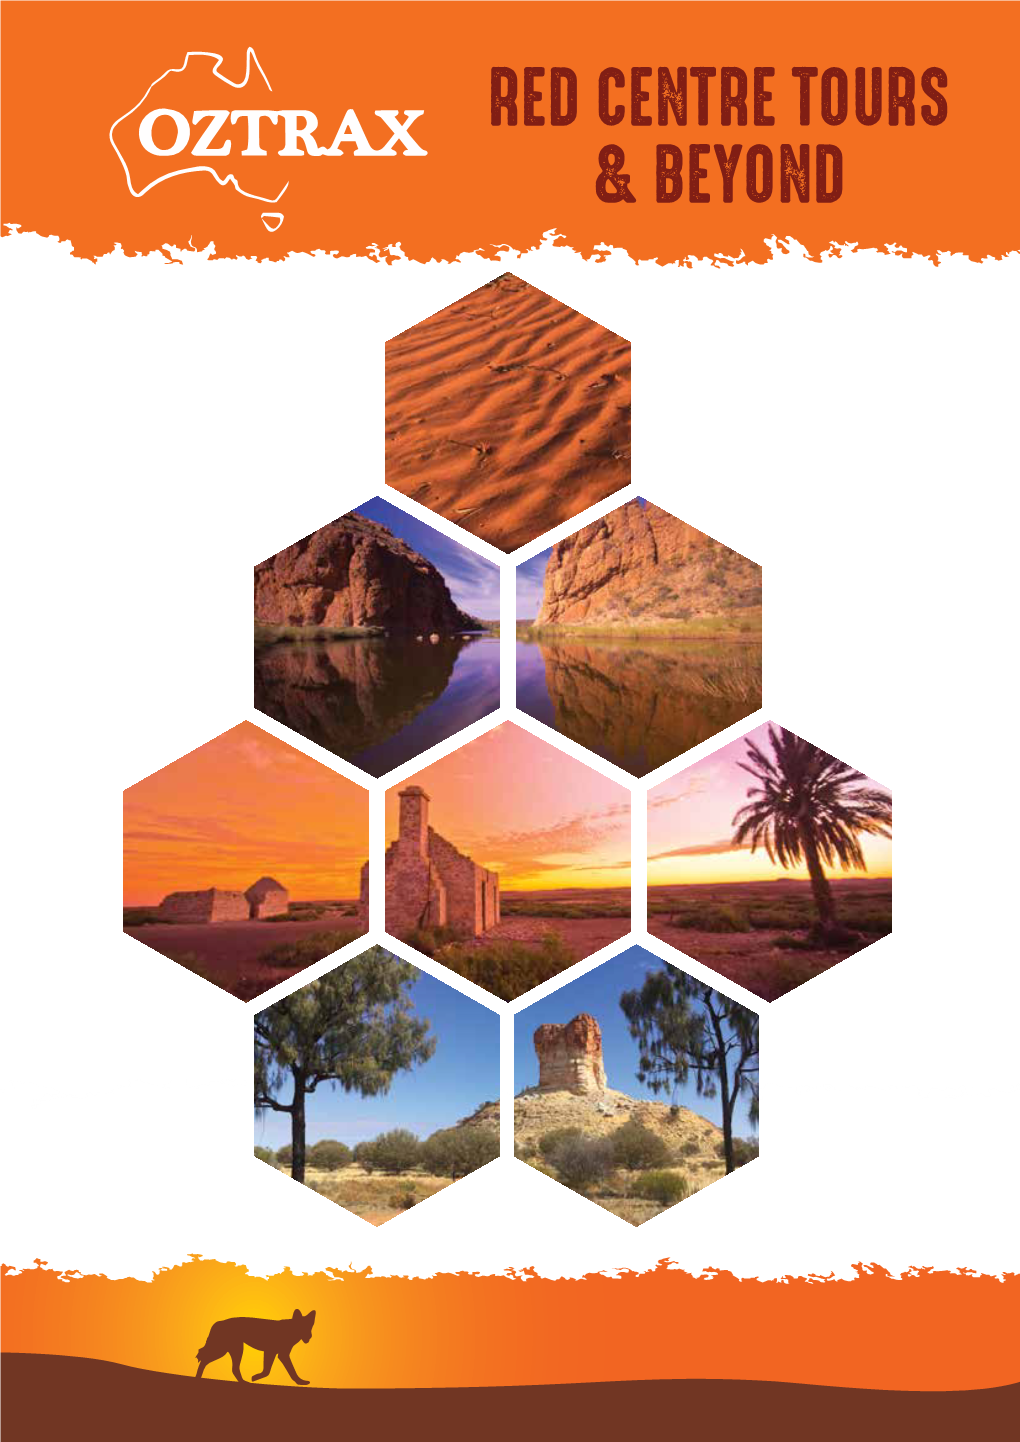 Red Centre Tours & Beyond